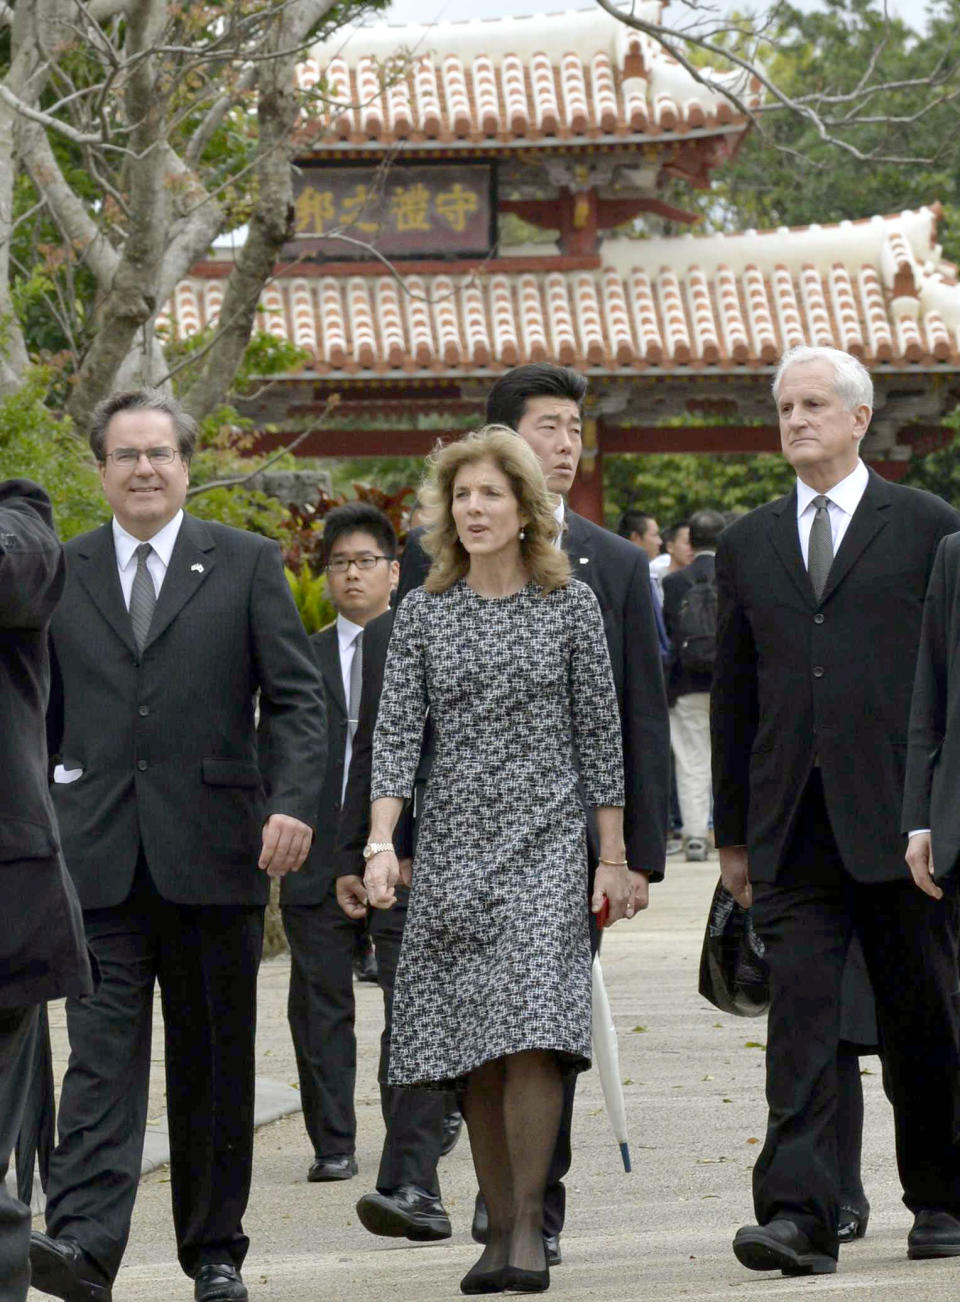 U.S. Ambassador to Japan Caroline Kennedy, right, leaves Shuri castle in Naha, Okinawa Wednesday, Feb. 12, 2014. Kennedy has made her first visit to the southernmost island of Okinawa, hoping to get support for a controversial plan to relocate a U.S. military base. (AP Photo/Kyodo News) JAPAN OUT, MANDATORY CREDIT